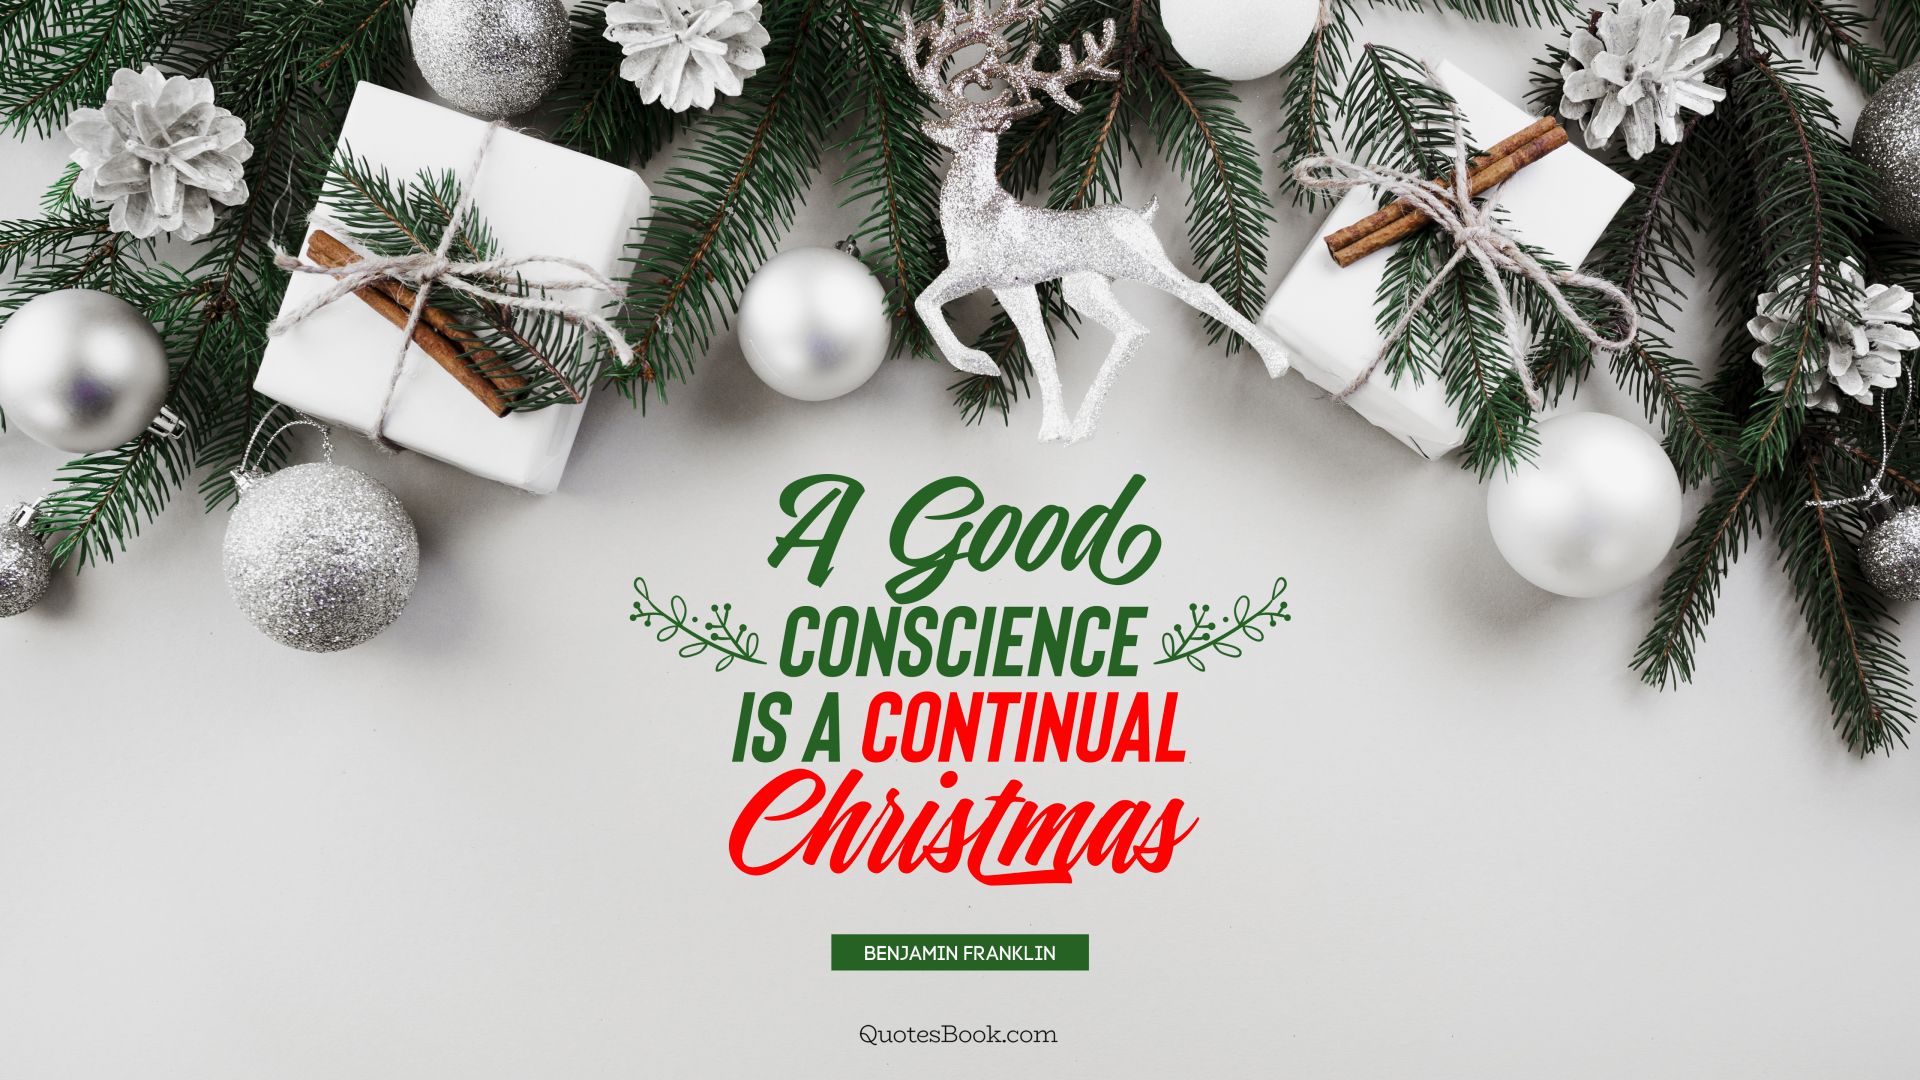 A good conscience is a continual Christmas. - Quote by Benjamin Franklin